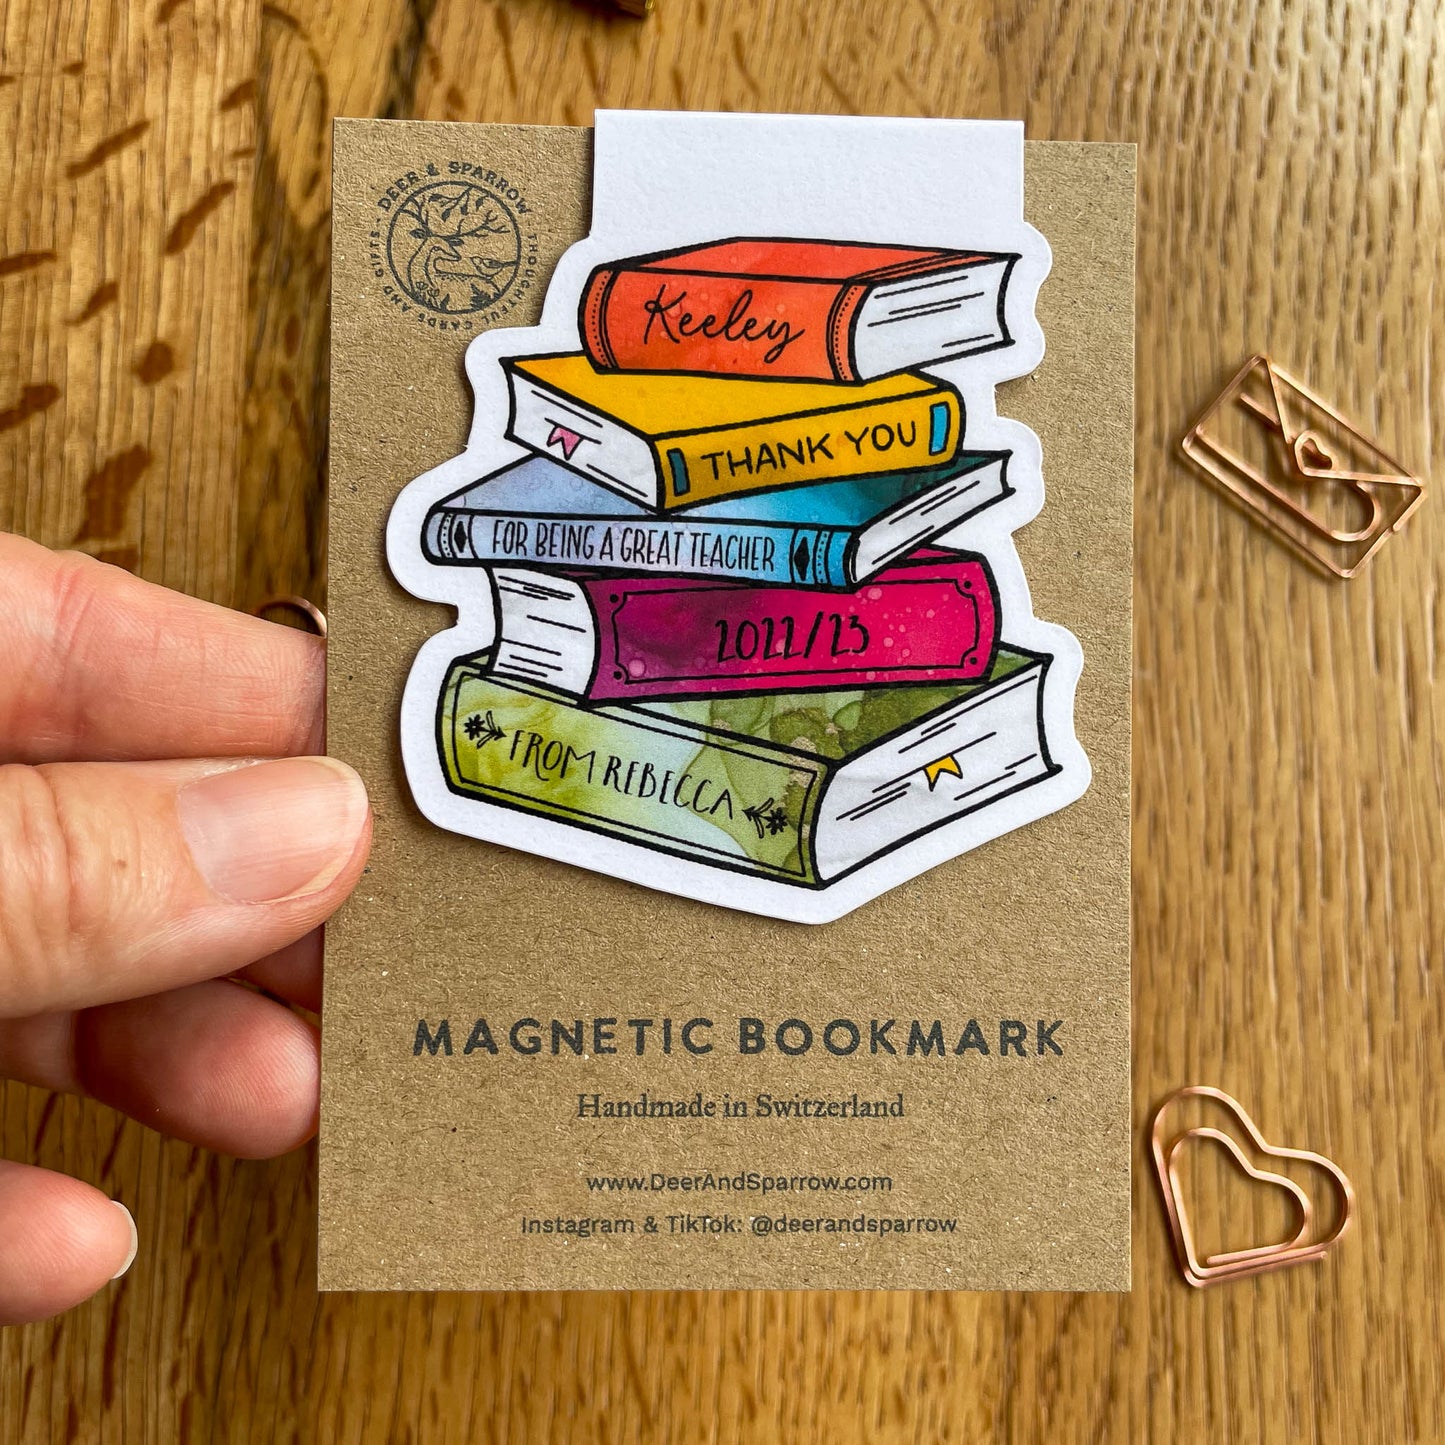 Custom-made magnetic bookmark for teachers with personalisation option